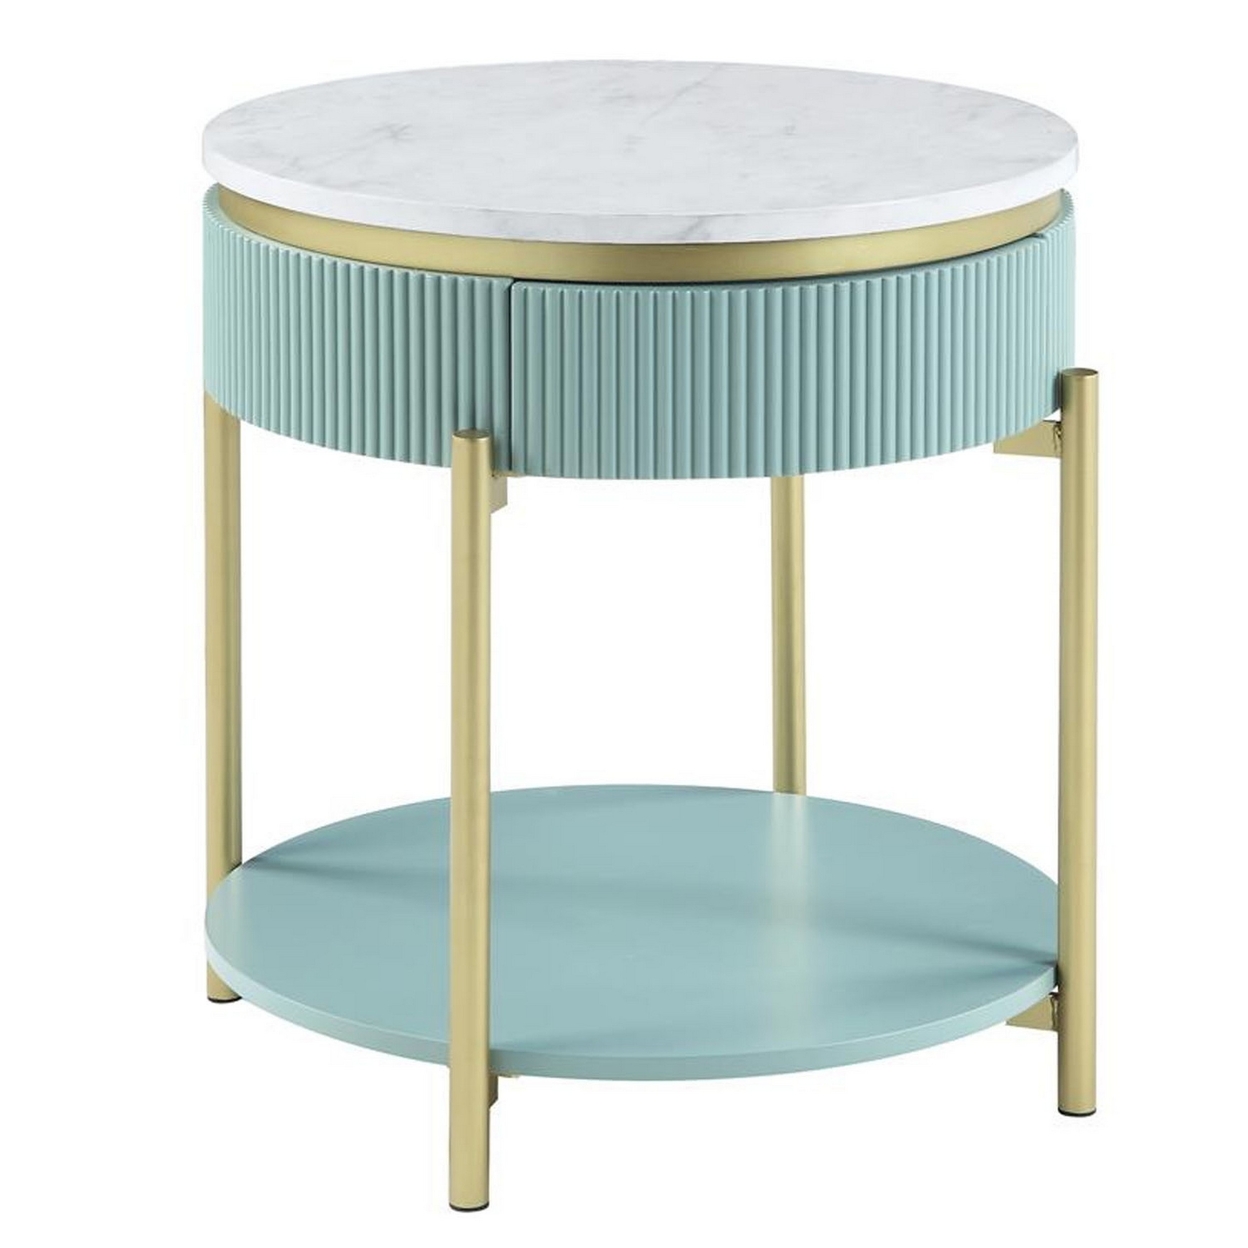 Ville 23 Inch Round Side End Table, White Faux Marble Top, Teal Reeded Edge- Saltoro Sherpi